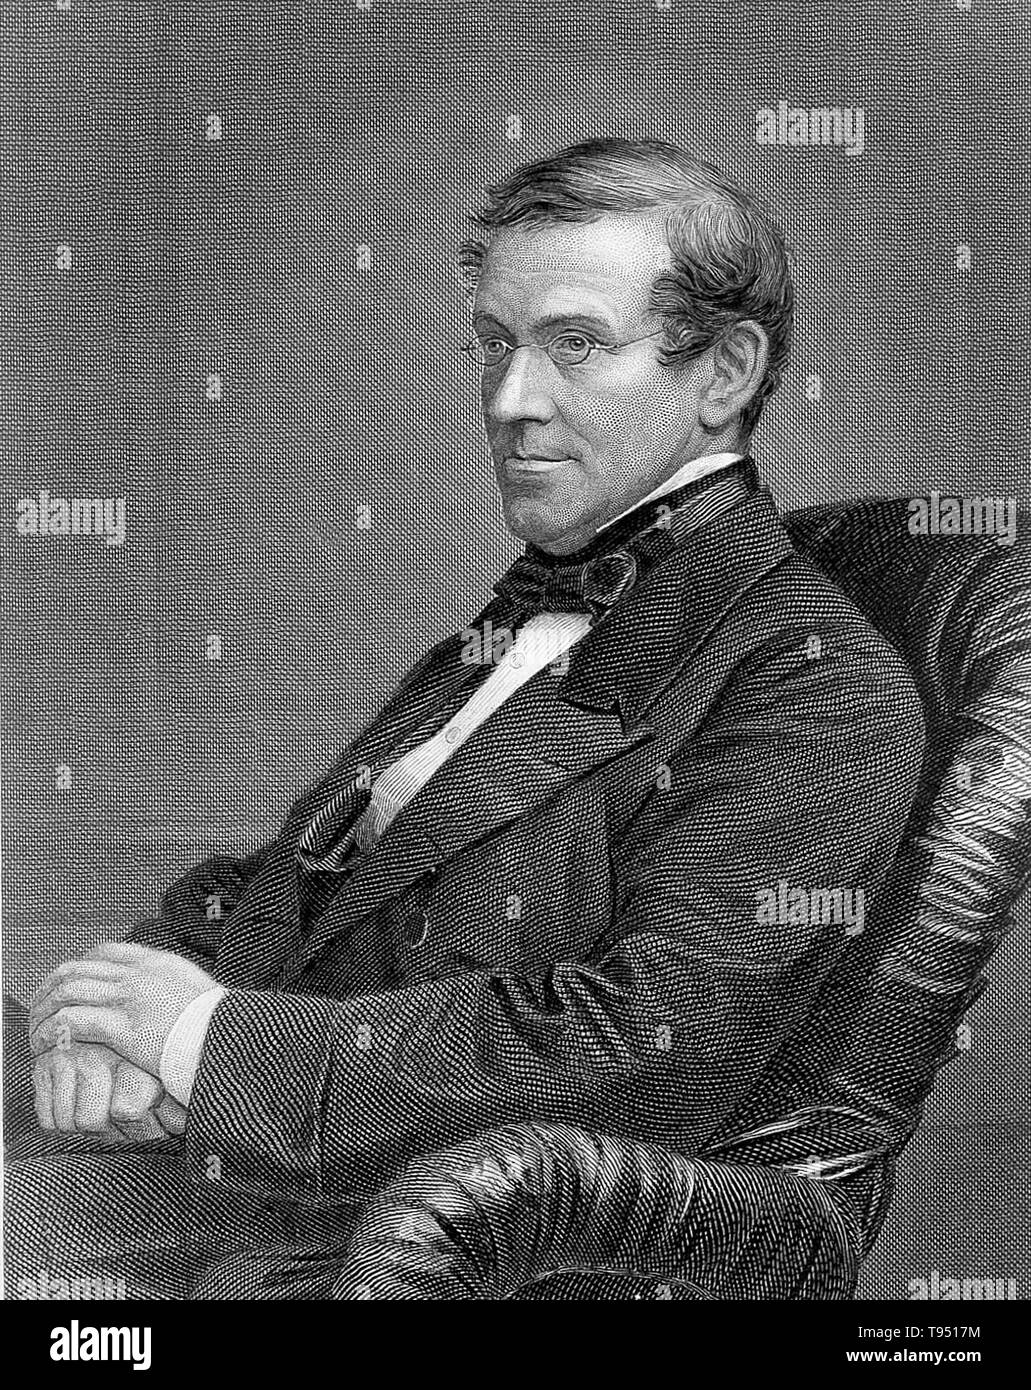 Sir Charles Wheatstone. Stipple engraving by C. Cook after Kilburn. Charles Wheatstone (1802-1875) was an English scientist and inventor of many scientific breakthroughs of the Victorian era, including the English concertina, the stereoscope (a device for displaying three-dimensional images), and the Playfair cipher (an encryption technique). Stock Photo